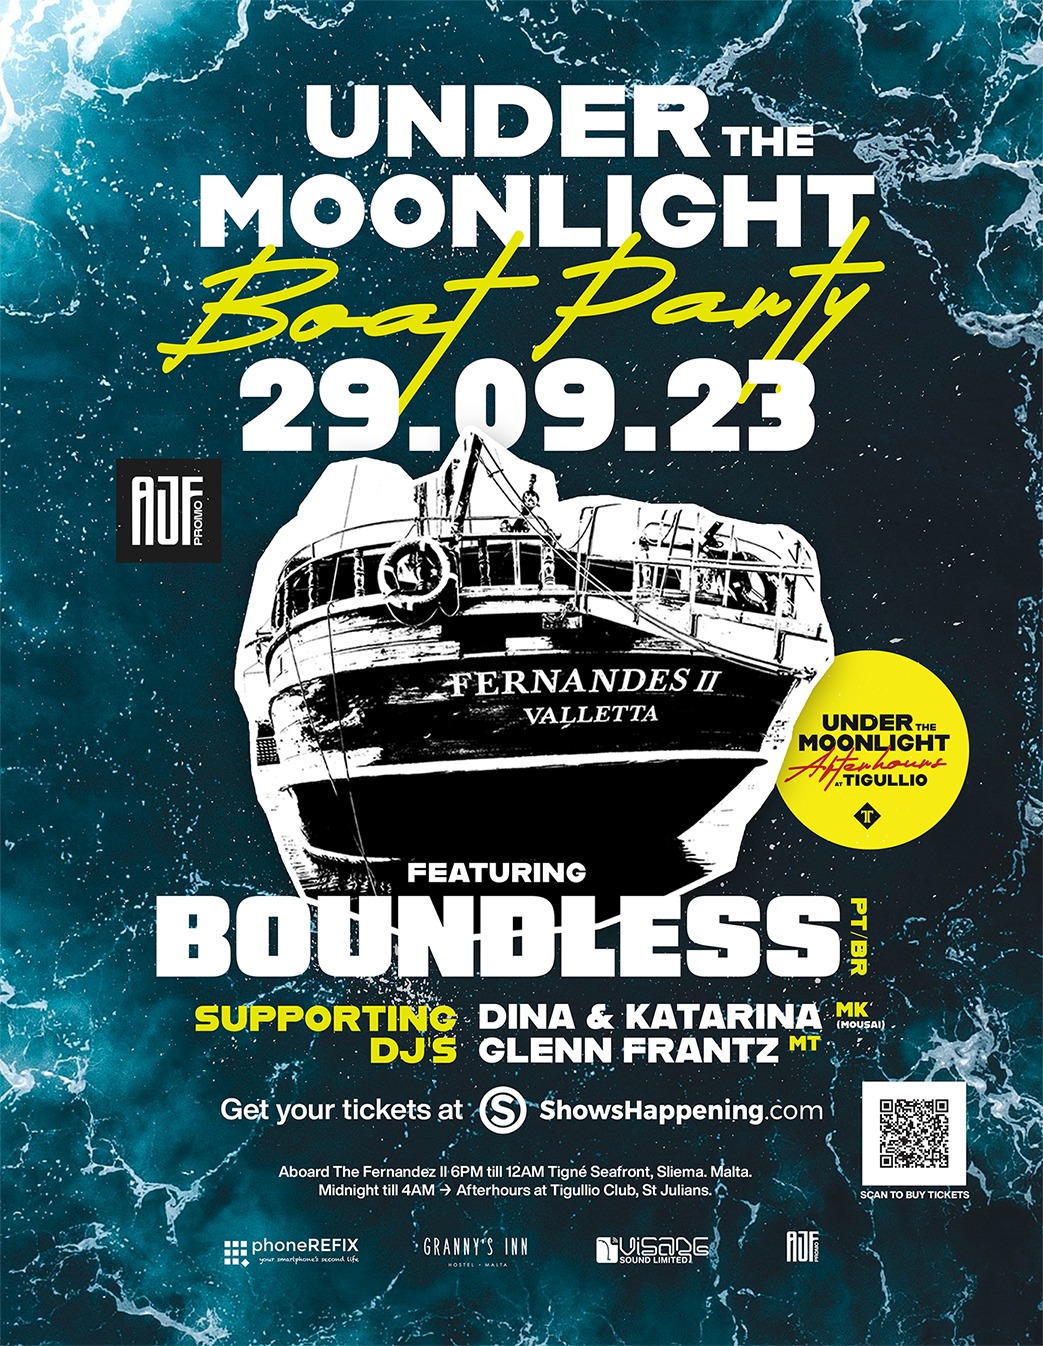 Under The Moonlight Boat Party poster